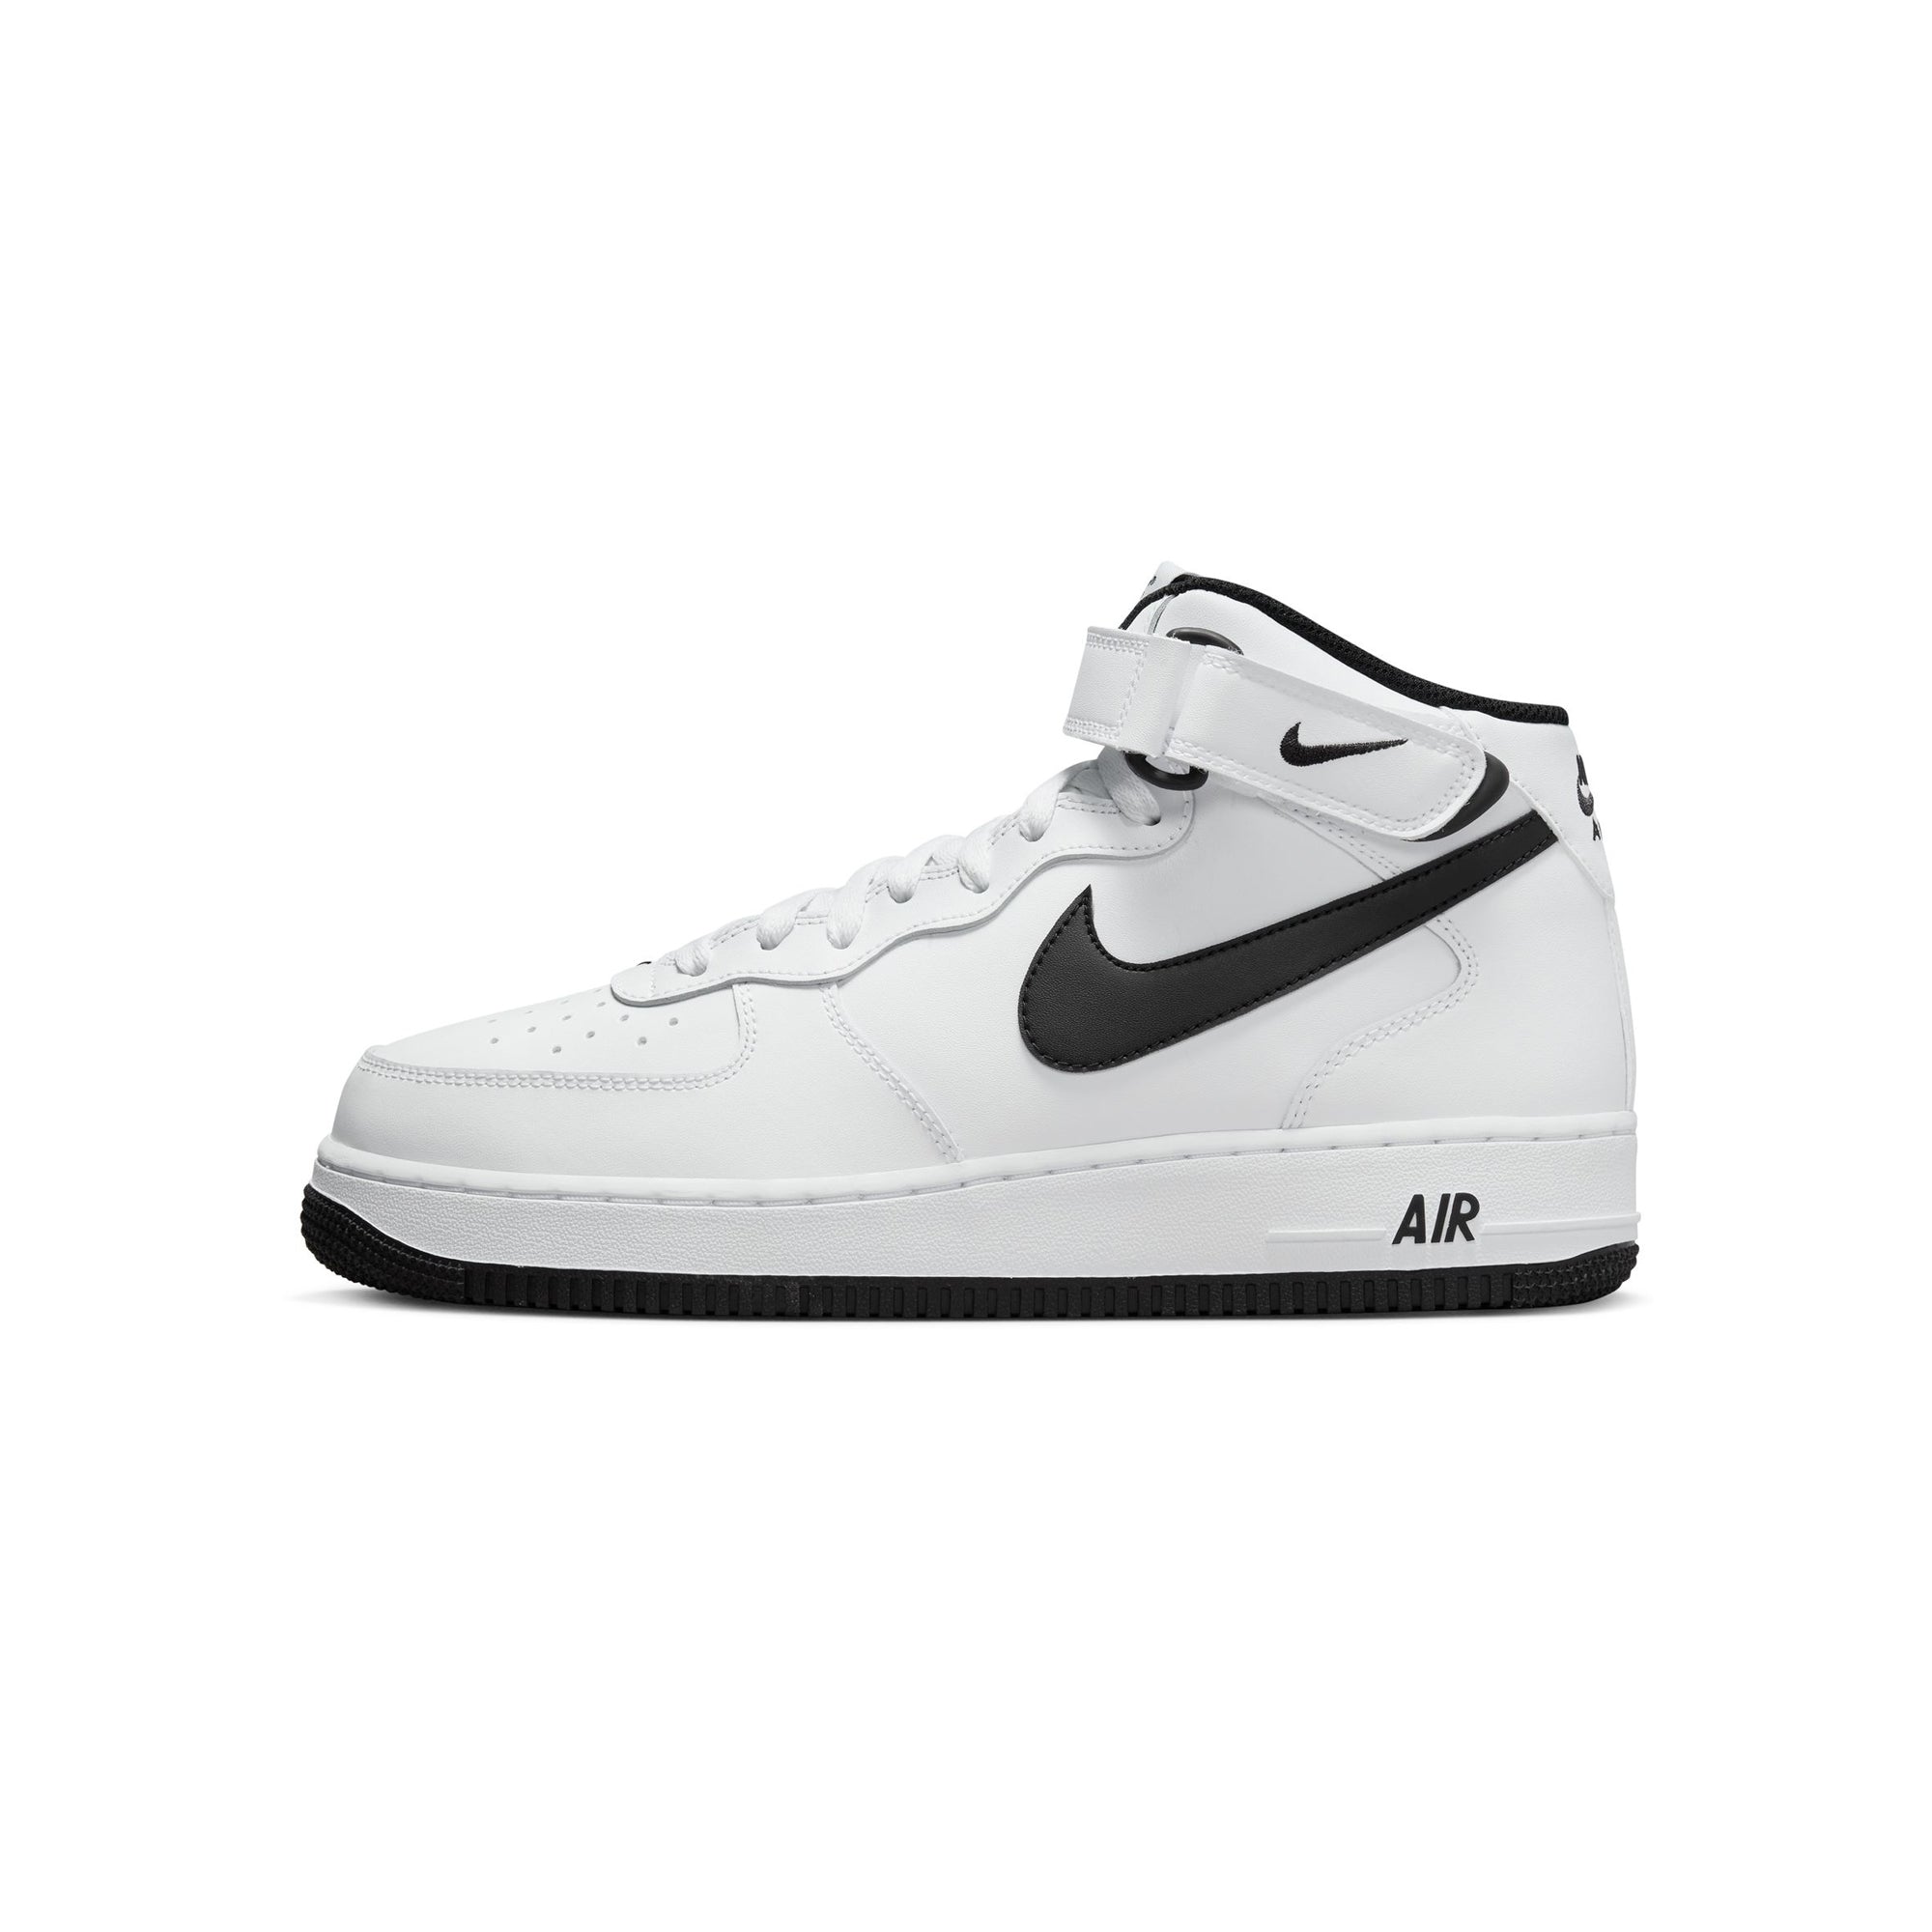 New Nike Air Force 1 Mid 07 LV8 White Black (Size 10) Ready To Ship!